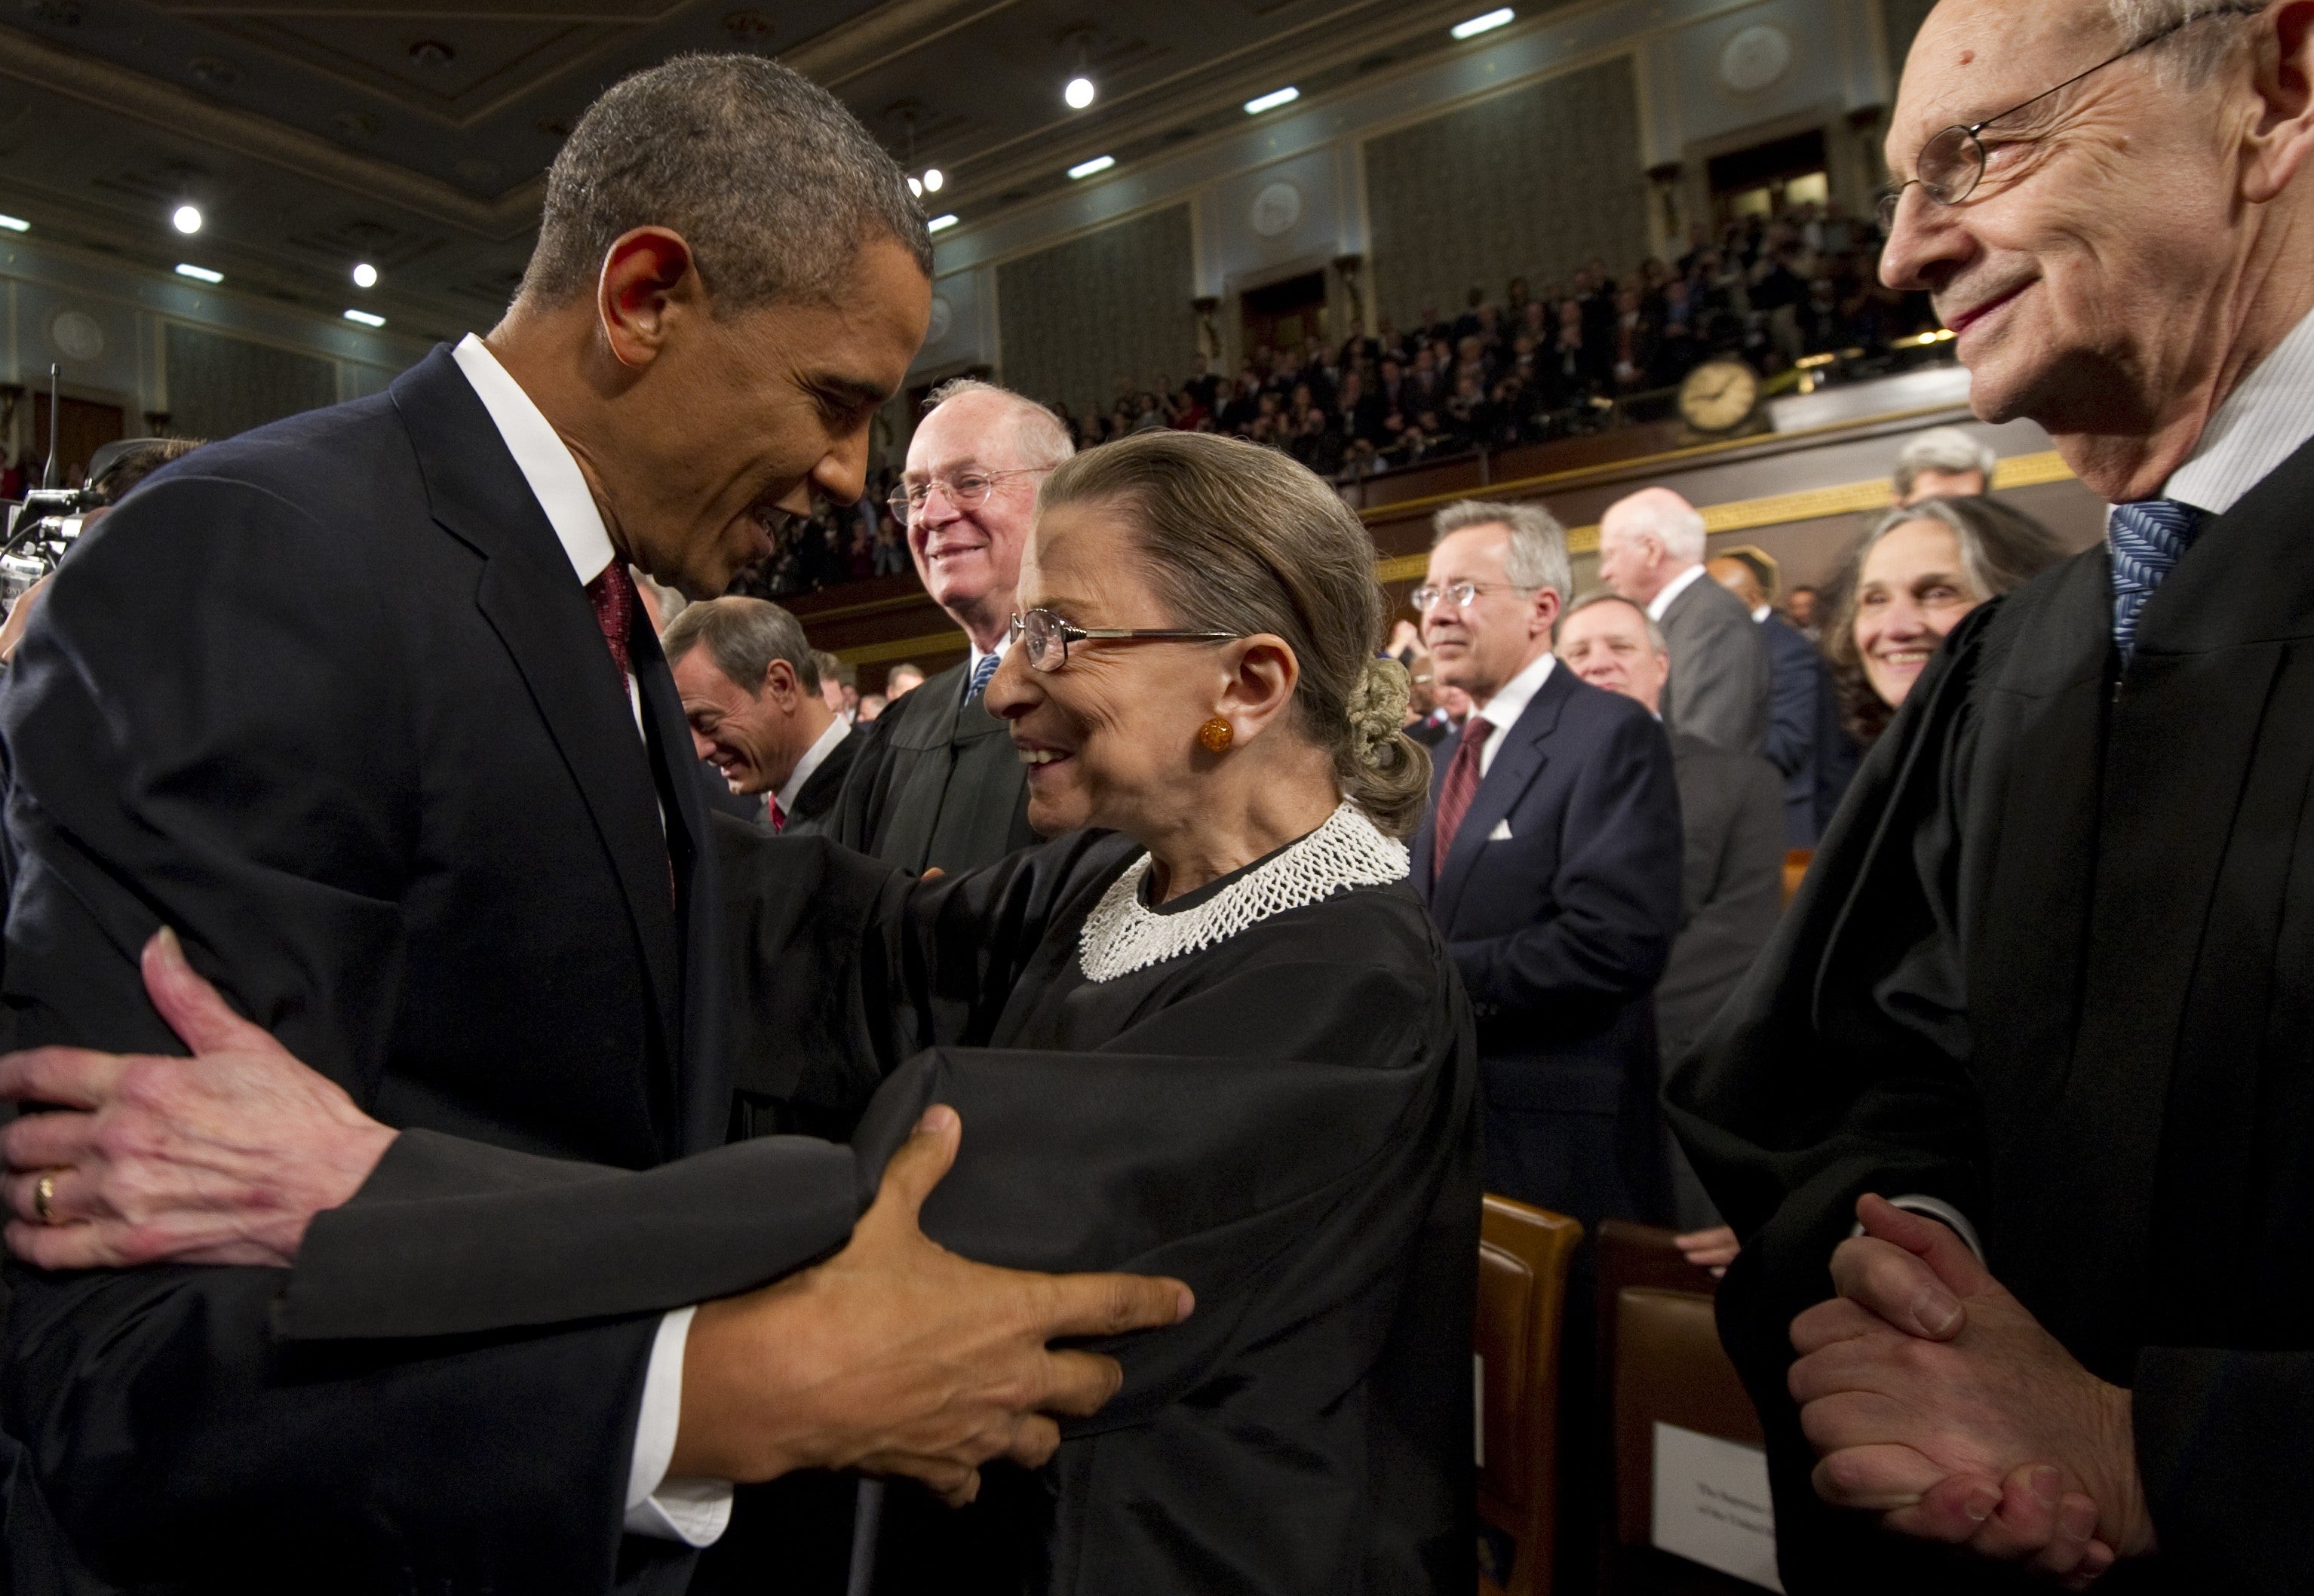 President Barack Obama greets Supreme Court Justice Ruth Bader Ginsburg before his State of the Union address in 2012